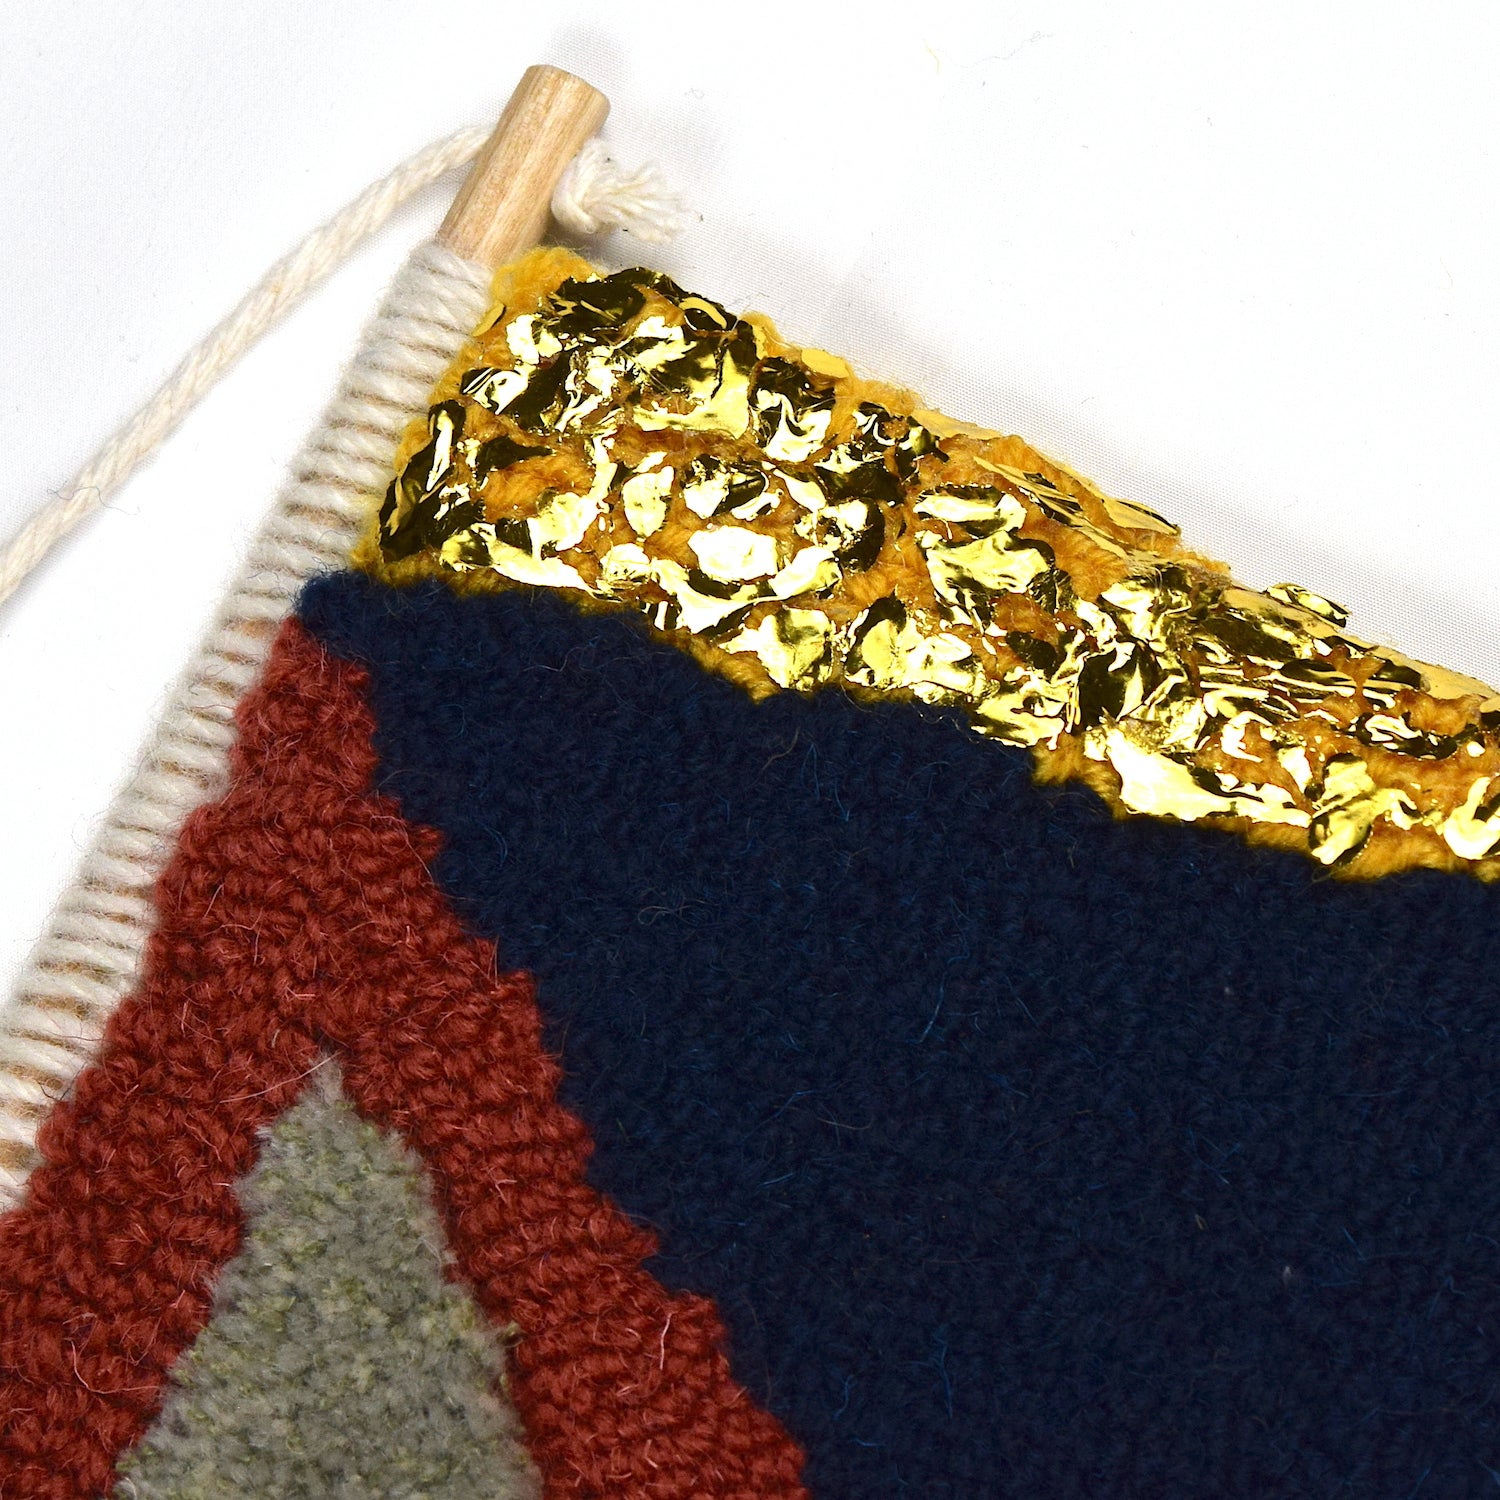 A fun mixture of FRAGMENT triangular shaped pieces created using British Wool and Reclaimed Yarns in a mixture of loop and cut piles and glorious gold accents. Coral, Khaki, Green, Navy and Yellow with a Black and White stripe close up.